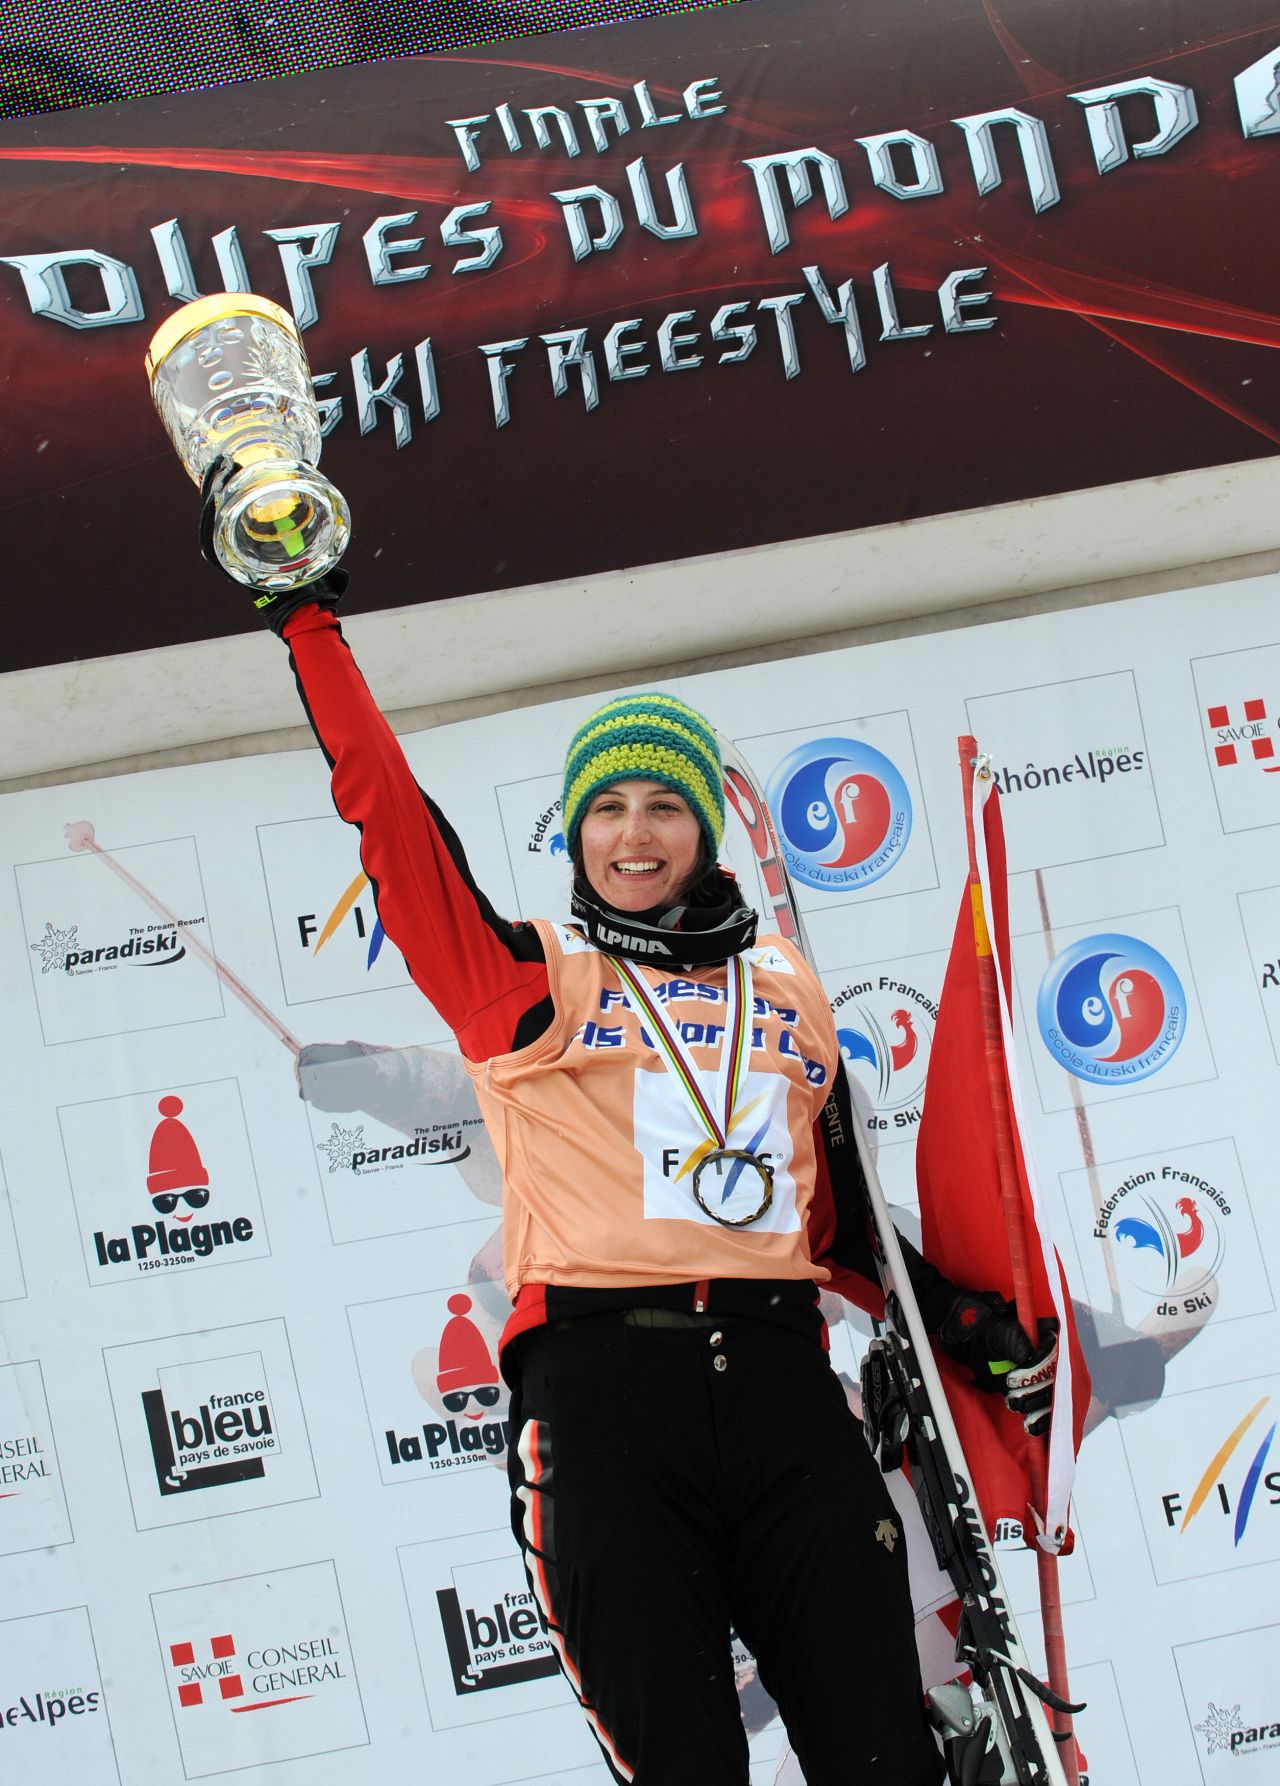 More and more people are making the crossover from alpine to the "dark side" of skiing -- freestyle. Canadian Kelsey Serwa made the switch in 2009 and has since become an X Games gold medalist and world champion in ski cross.